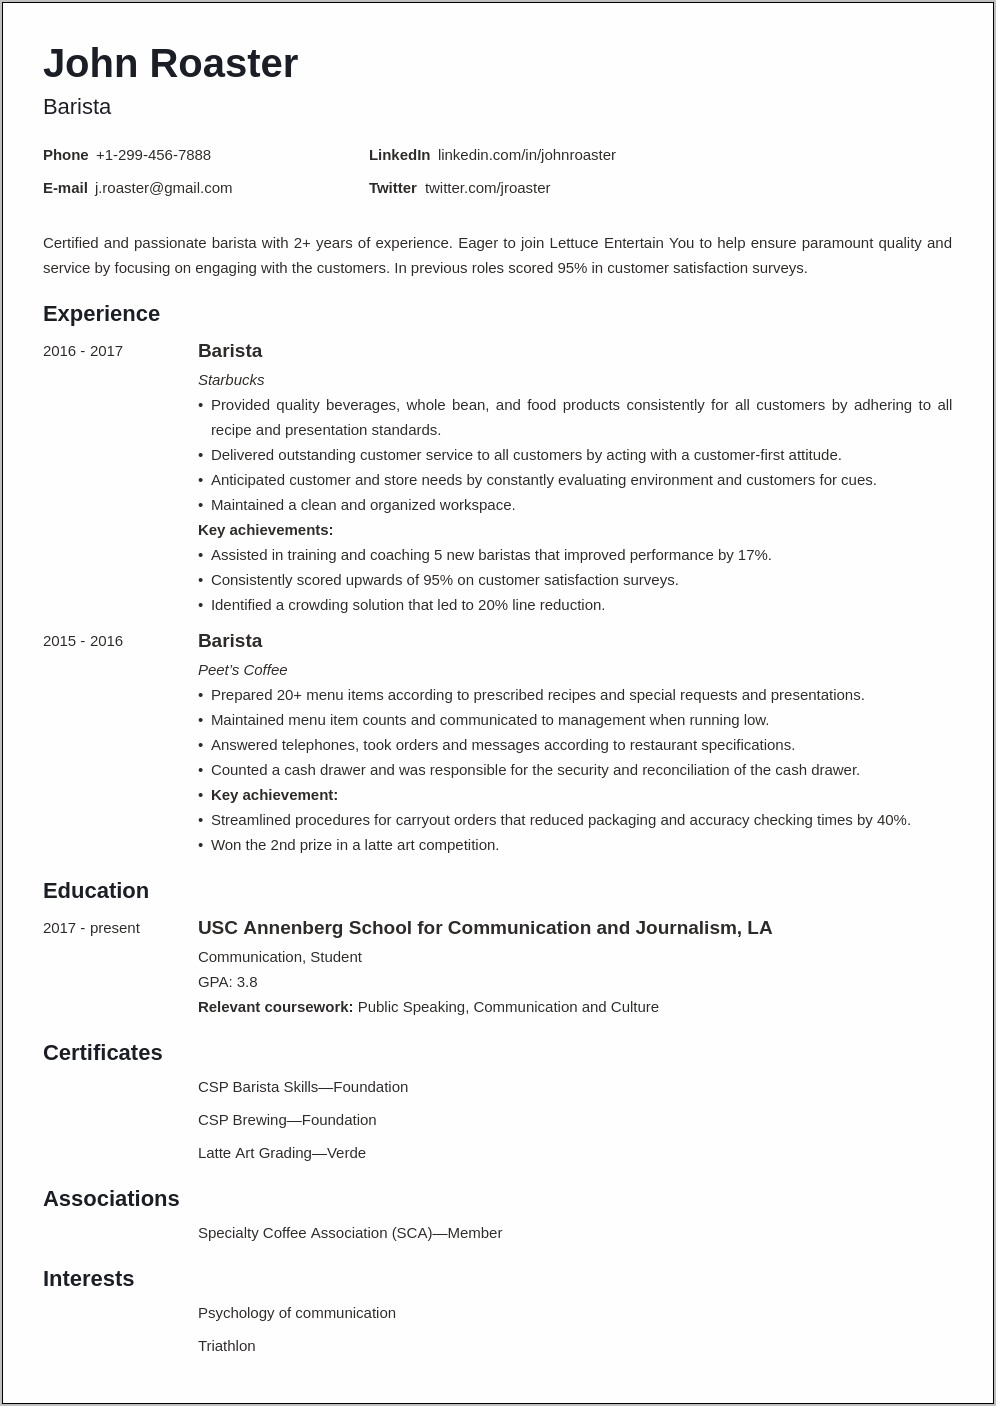 Example Research Interest Section Resume